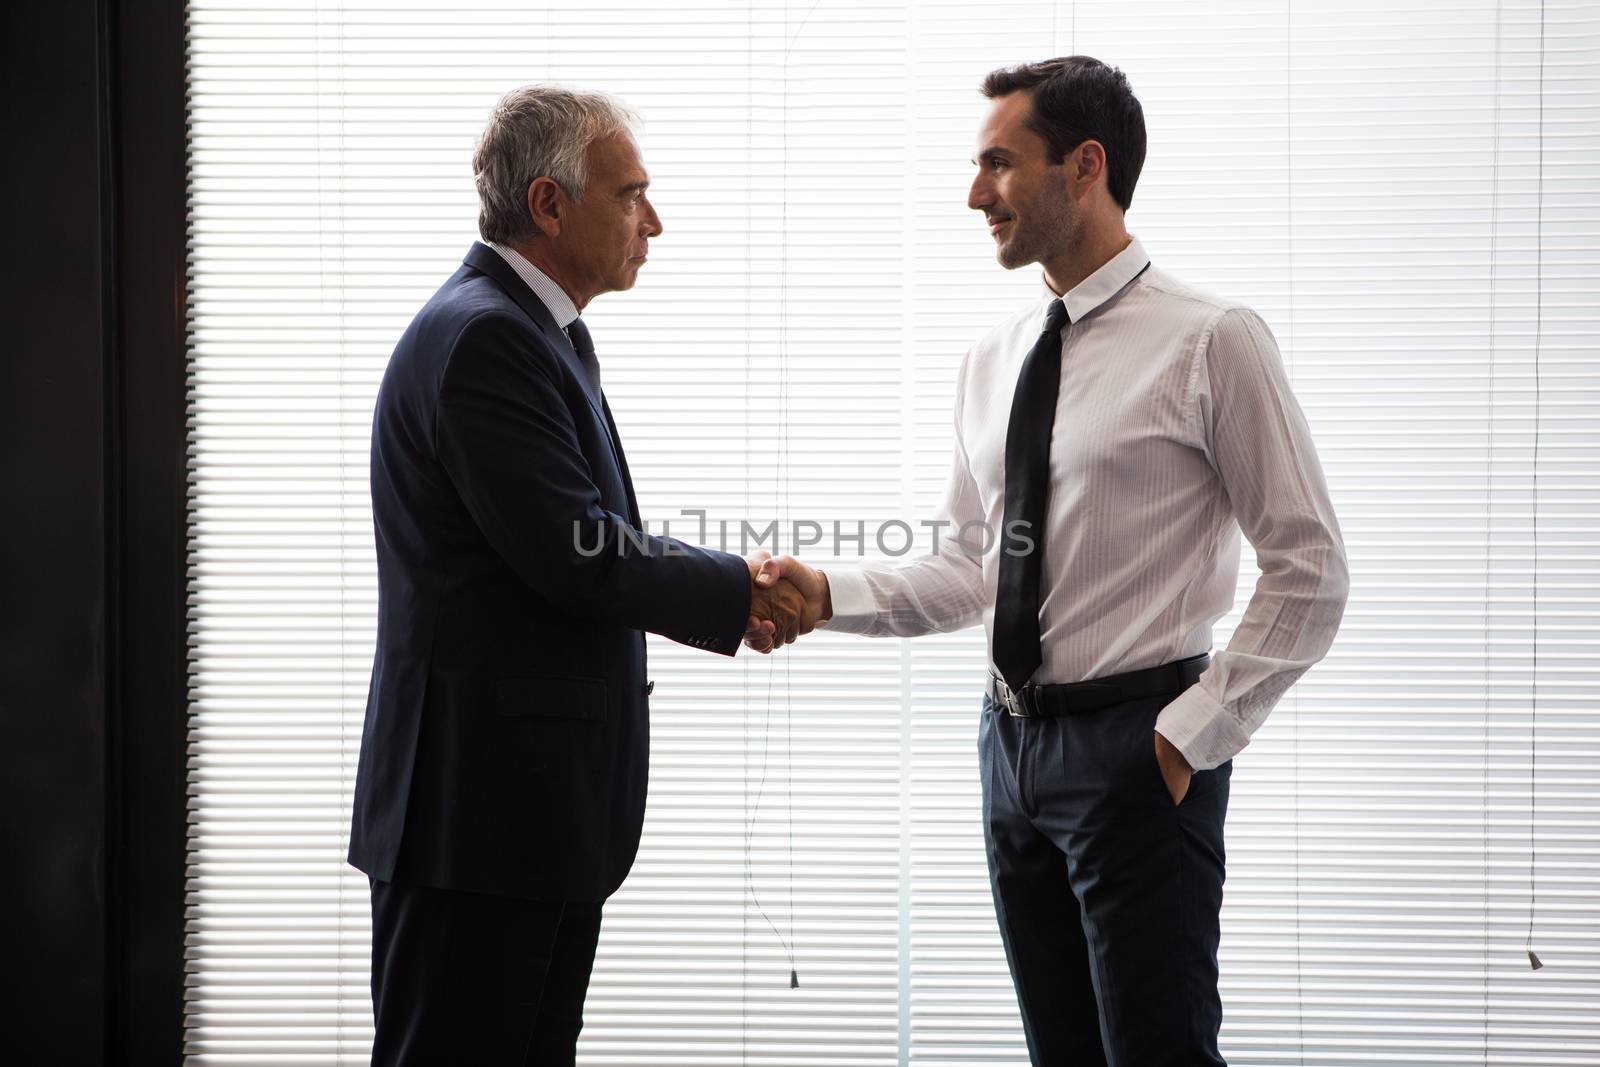 Half length portrait of two businessmen standing up and shaking hands